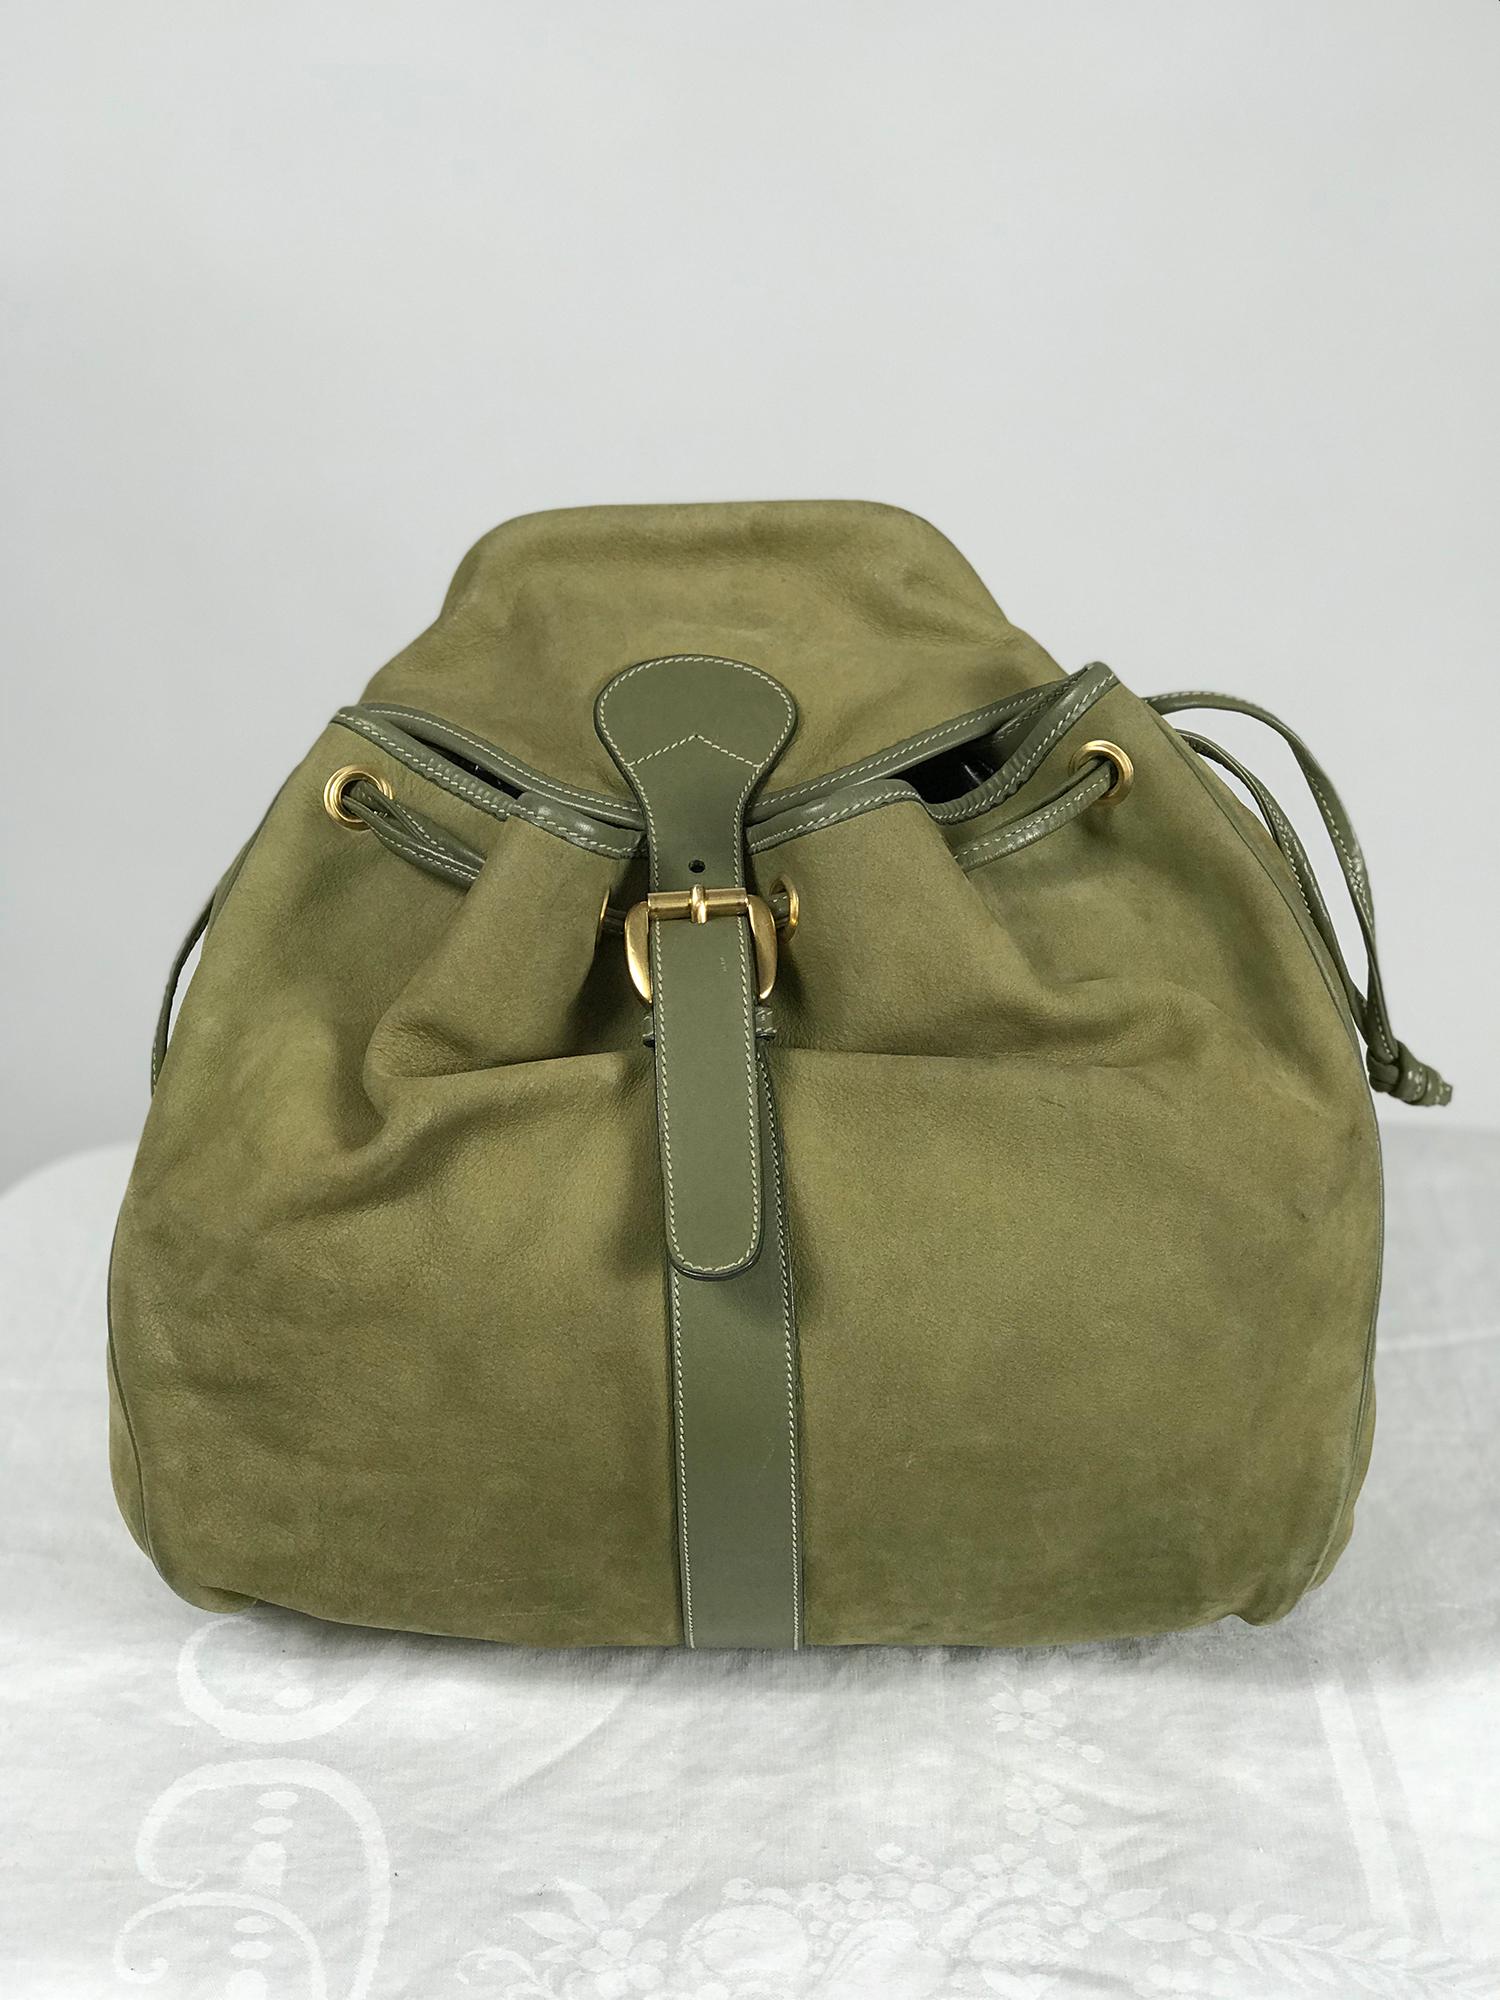 Gucci pale moss green leather and suede backpack. This beautiful piece is perfect for traveling or work, it's roomy and well made. The colour is very unusual. Gold metal hardware, the rivets have double G logos, the front closes with a gold buckle.